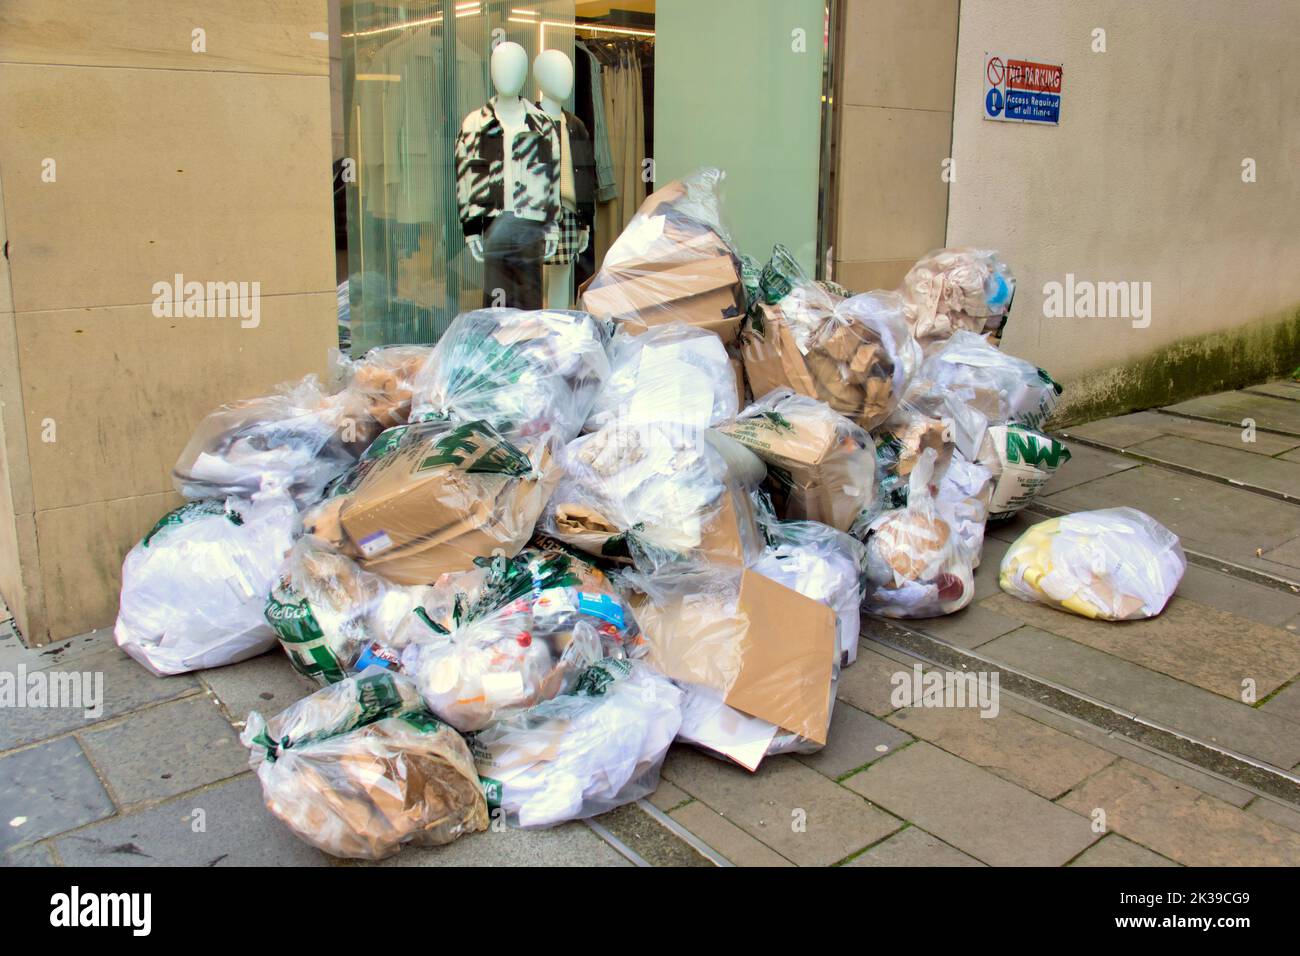 industrial rubbish out for collection outside shop window with mannikins on the style mile Buchanan street Glasgow, Scotland, UK Stock Photo